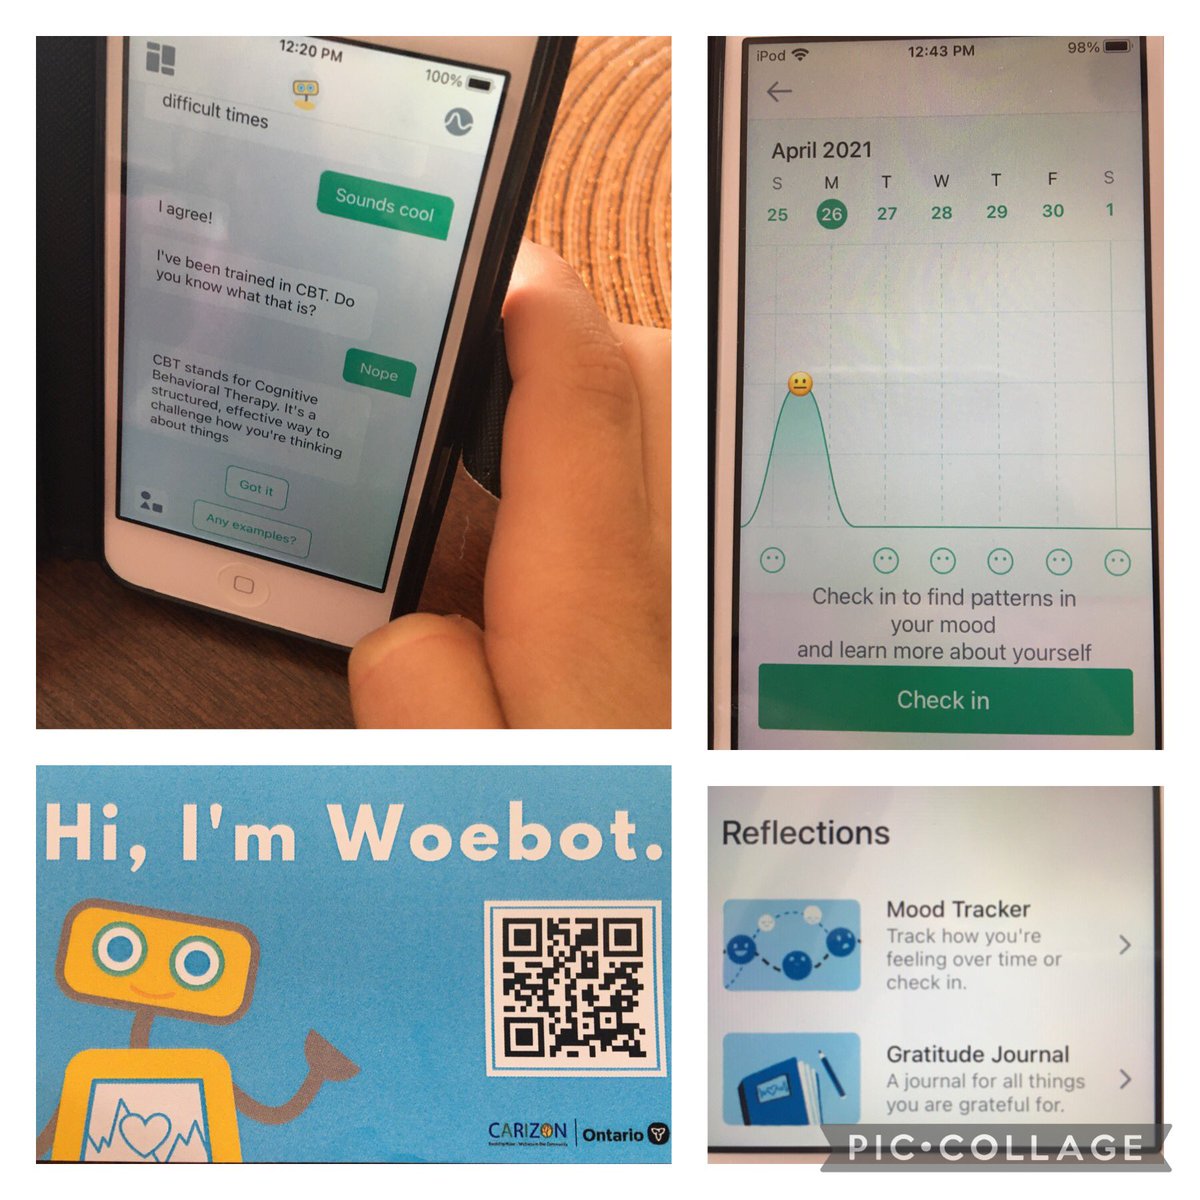 My daughter and I are experimenting with the @HiWoebot app. Quick and easy daily check ins (sends you notifications) and we really enjoy the mood tracker and gratitude journal data collecting! @Carizon @kwcounselling @ICC_NewHamburg @familycounsell1 #StrongerTogetherWR